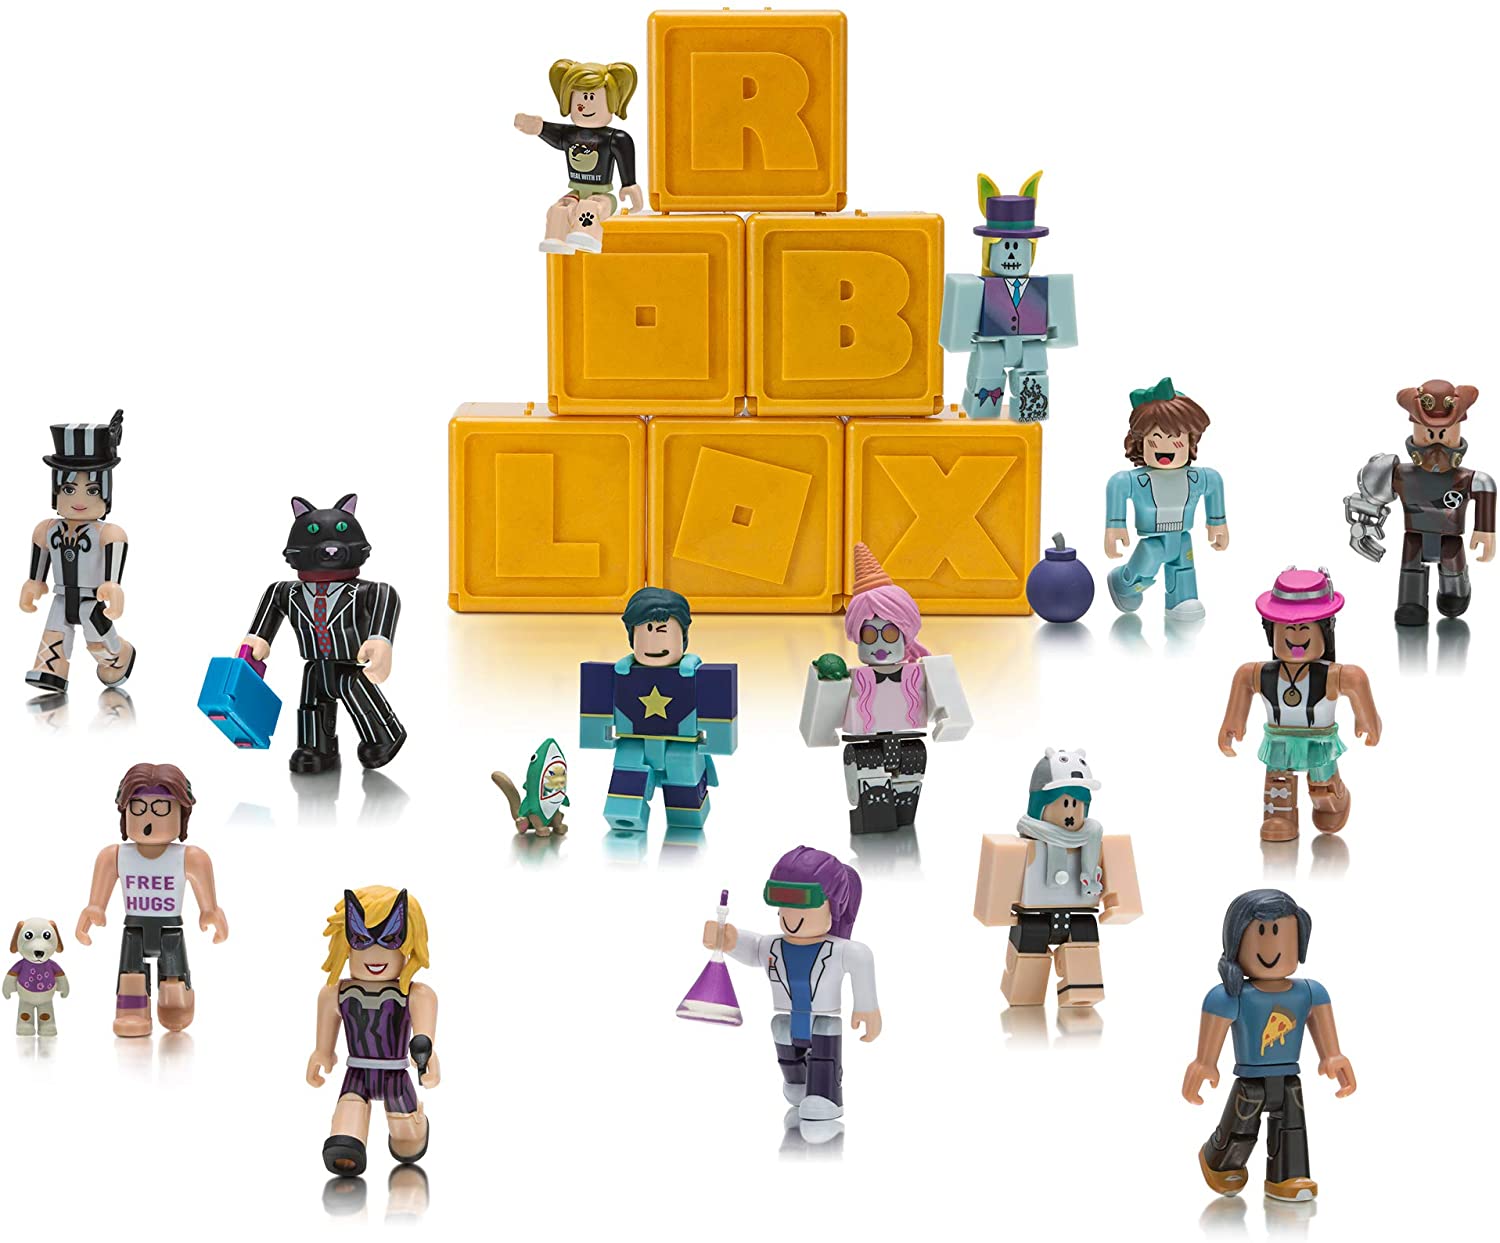 Roblox CODES ONLY Celebrity Series 1 2 3 4 5 6 7 8 9 Figures Toys Item-USPS  SHIP